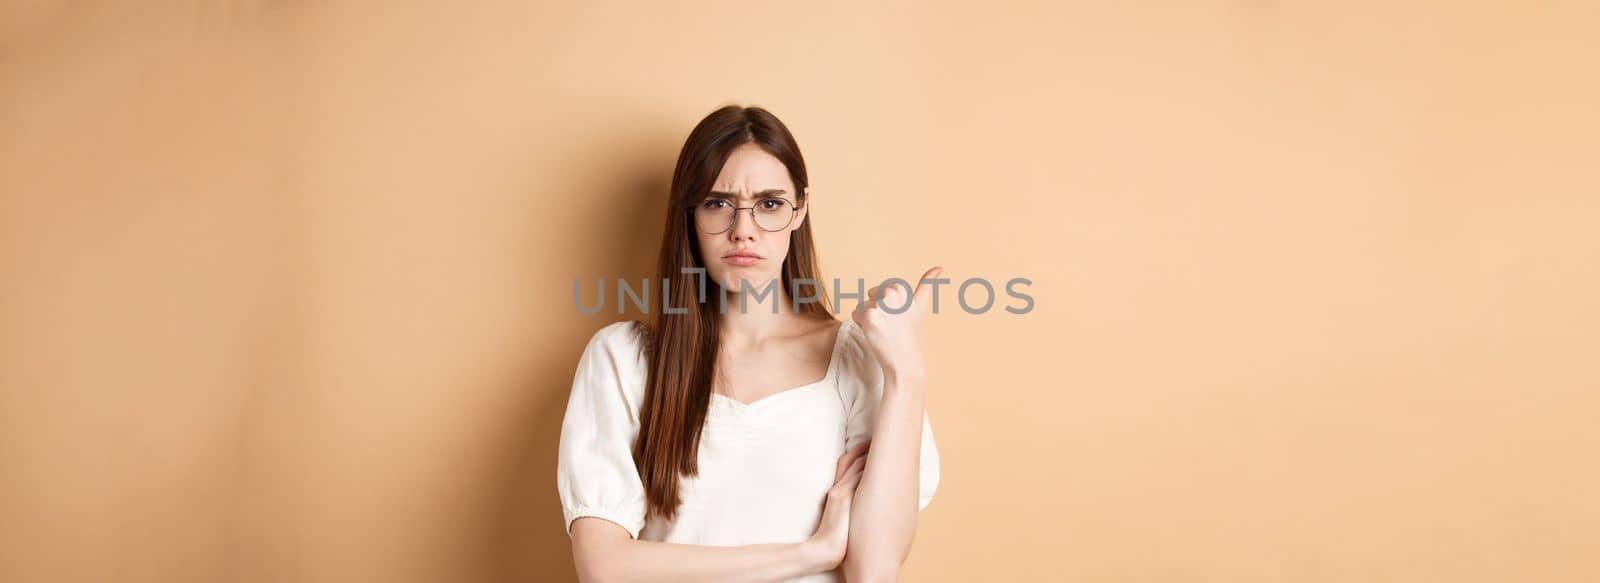 Disappointed girl in glasses frowning, pointing aside at bad product, disapprove and dislike something, standing on beige background.